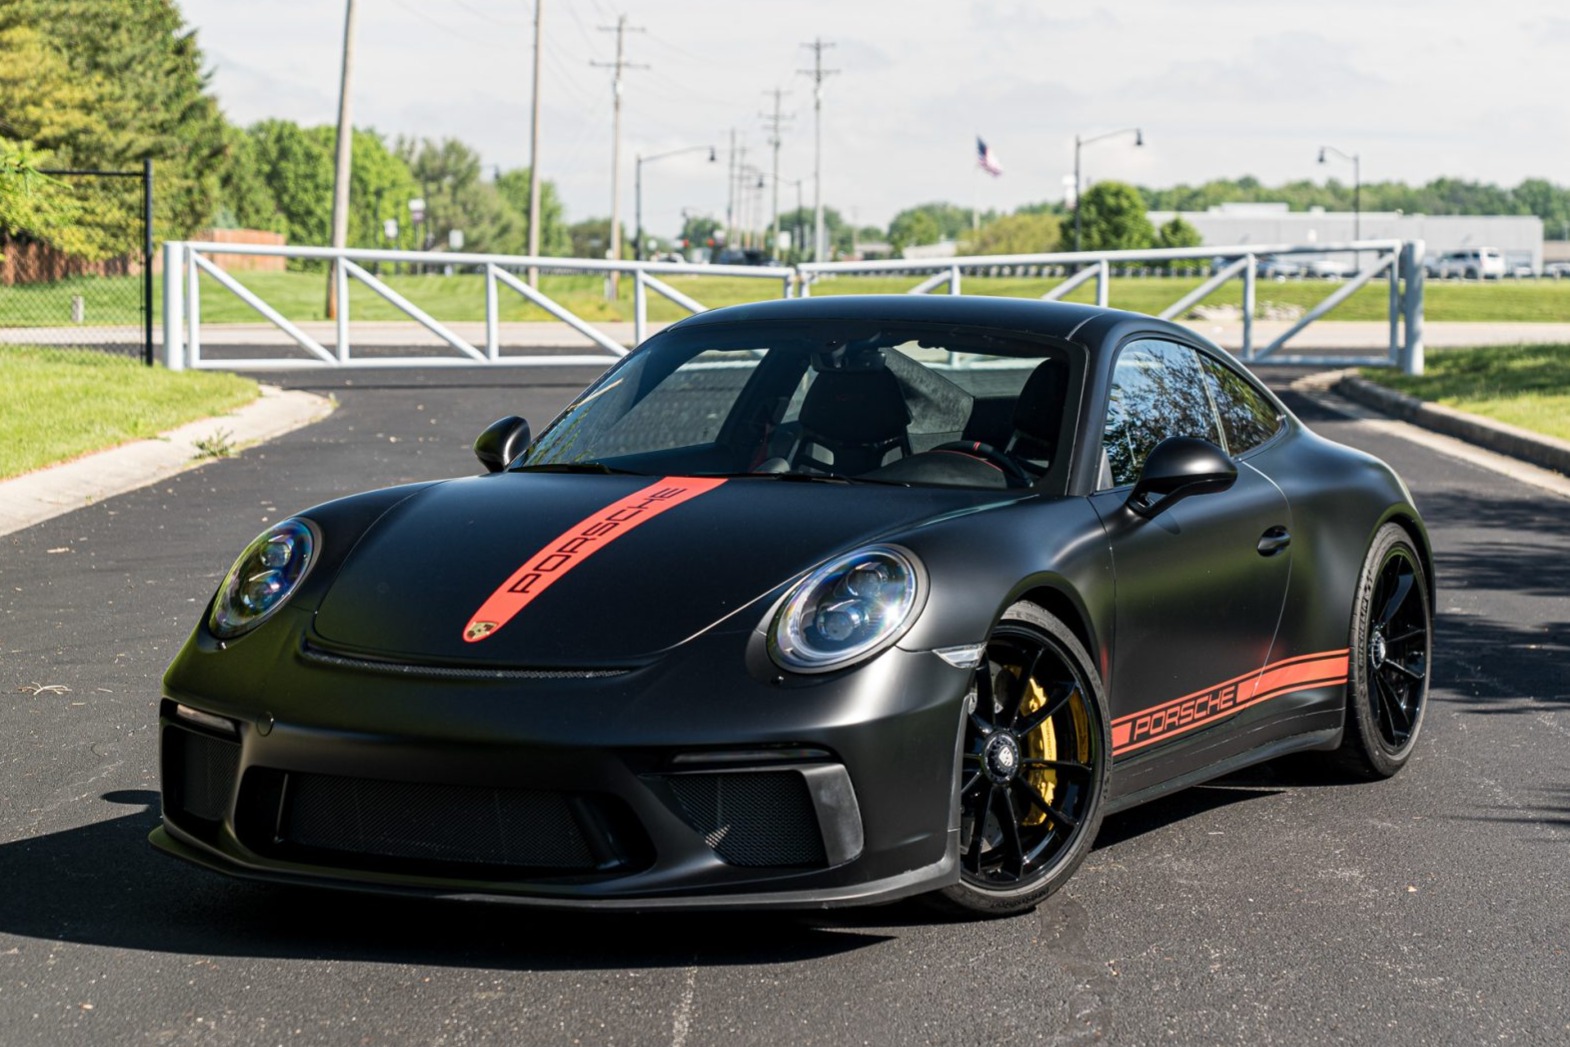 Used 6k-Mile 2018 Porsche 911 GT3 Touring 6-Speed Review